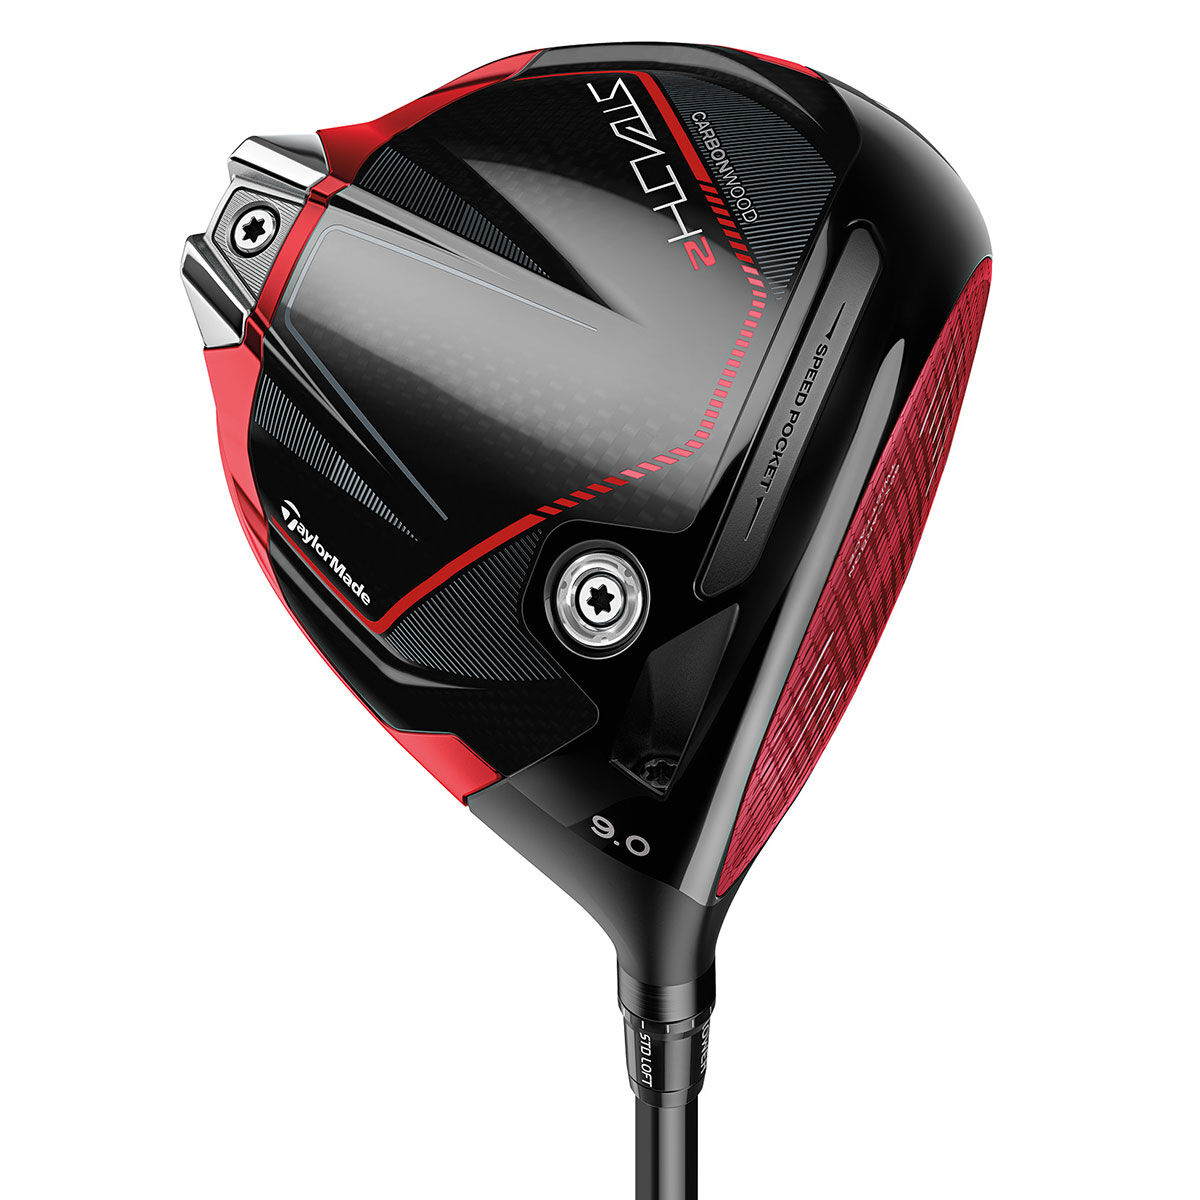 TaylorMade Golf Driver, Men's Black and Red Lightweight STEALTH 2 Stiff Fuji Ventus Tr Right Hand, Size: 9° | American Golf von TaylorMade